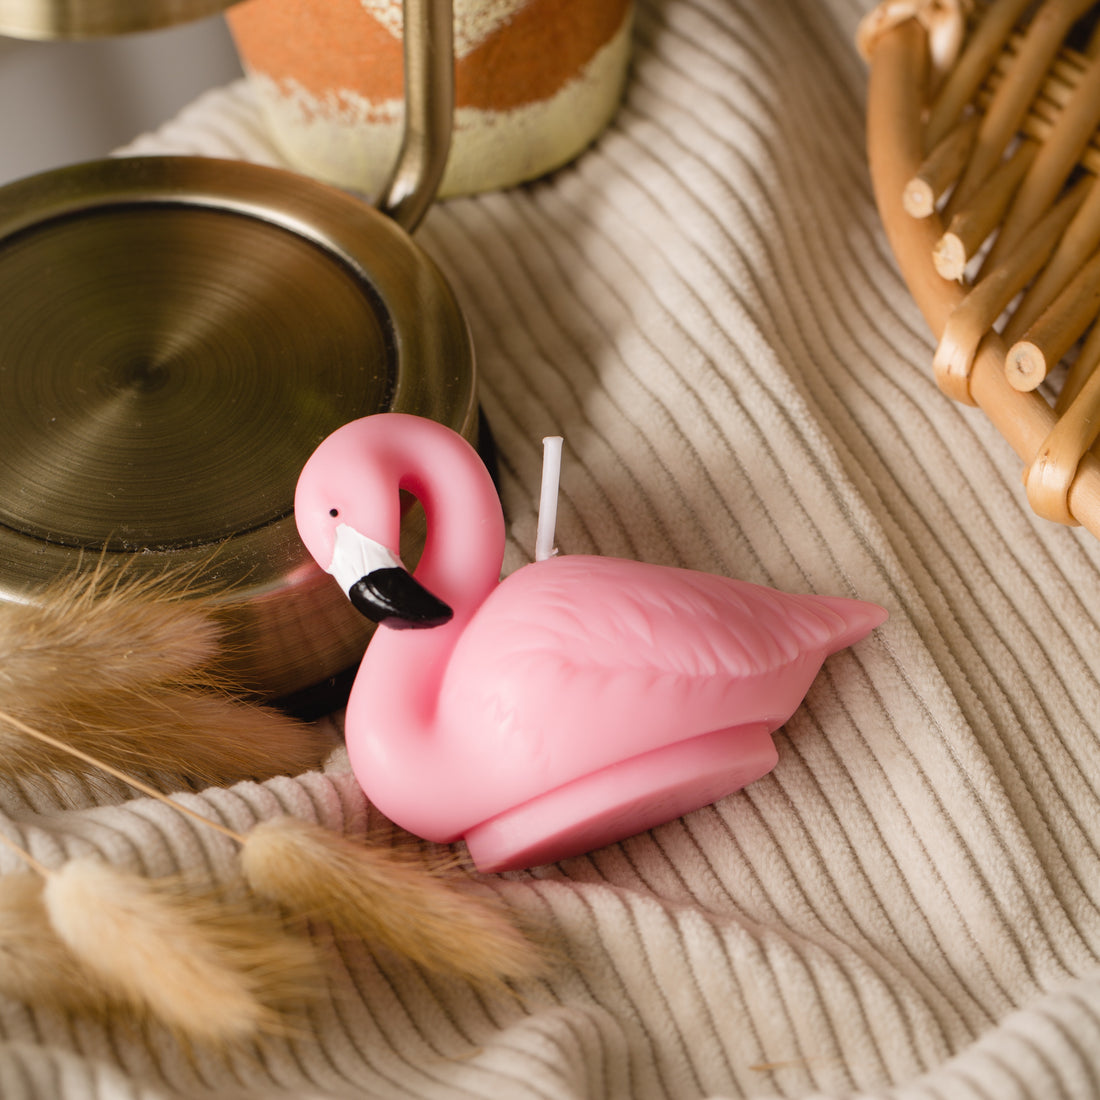 f Flamingo Candle from Southlake Gifts.